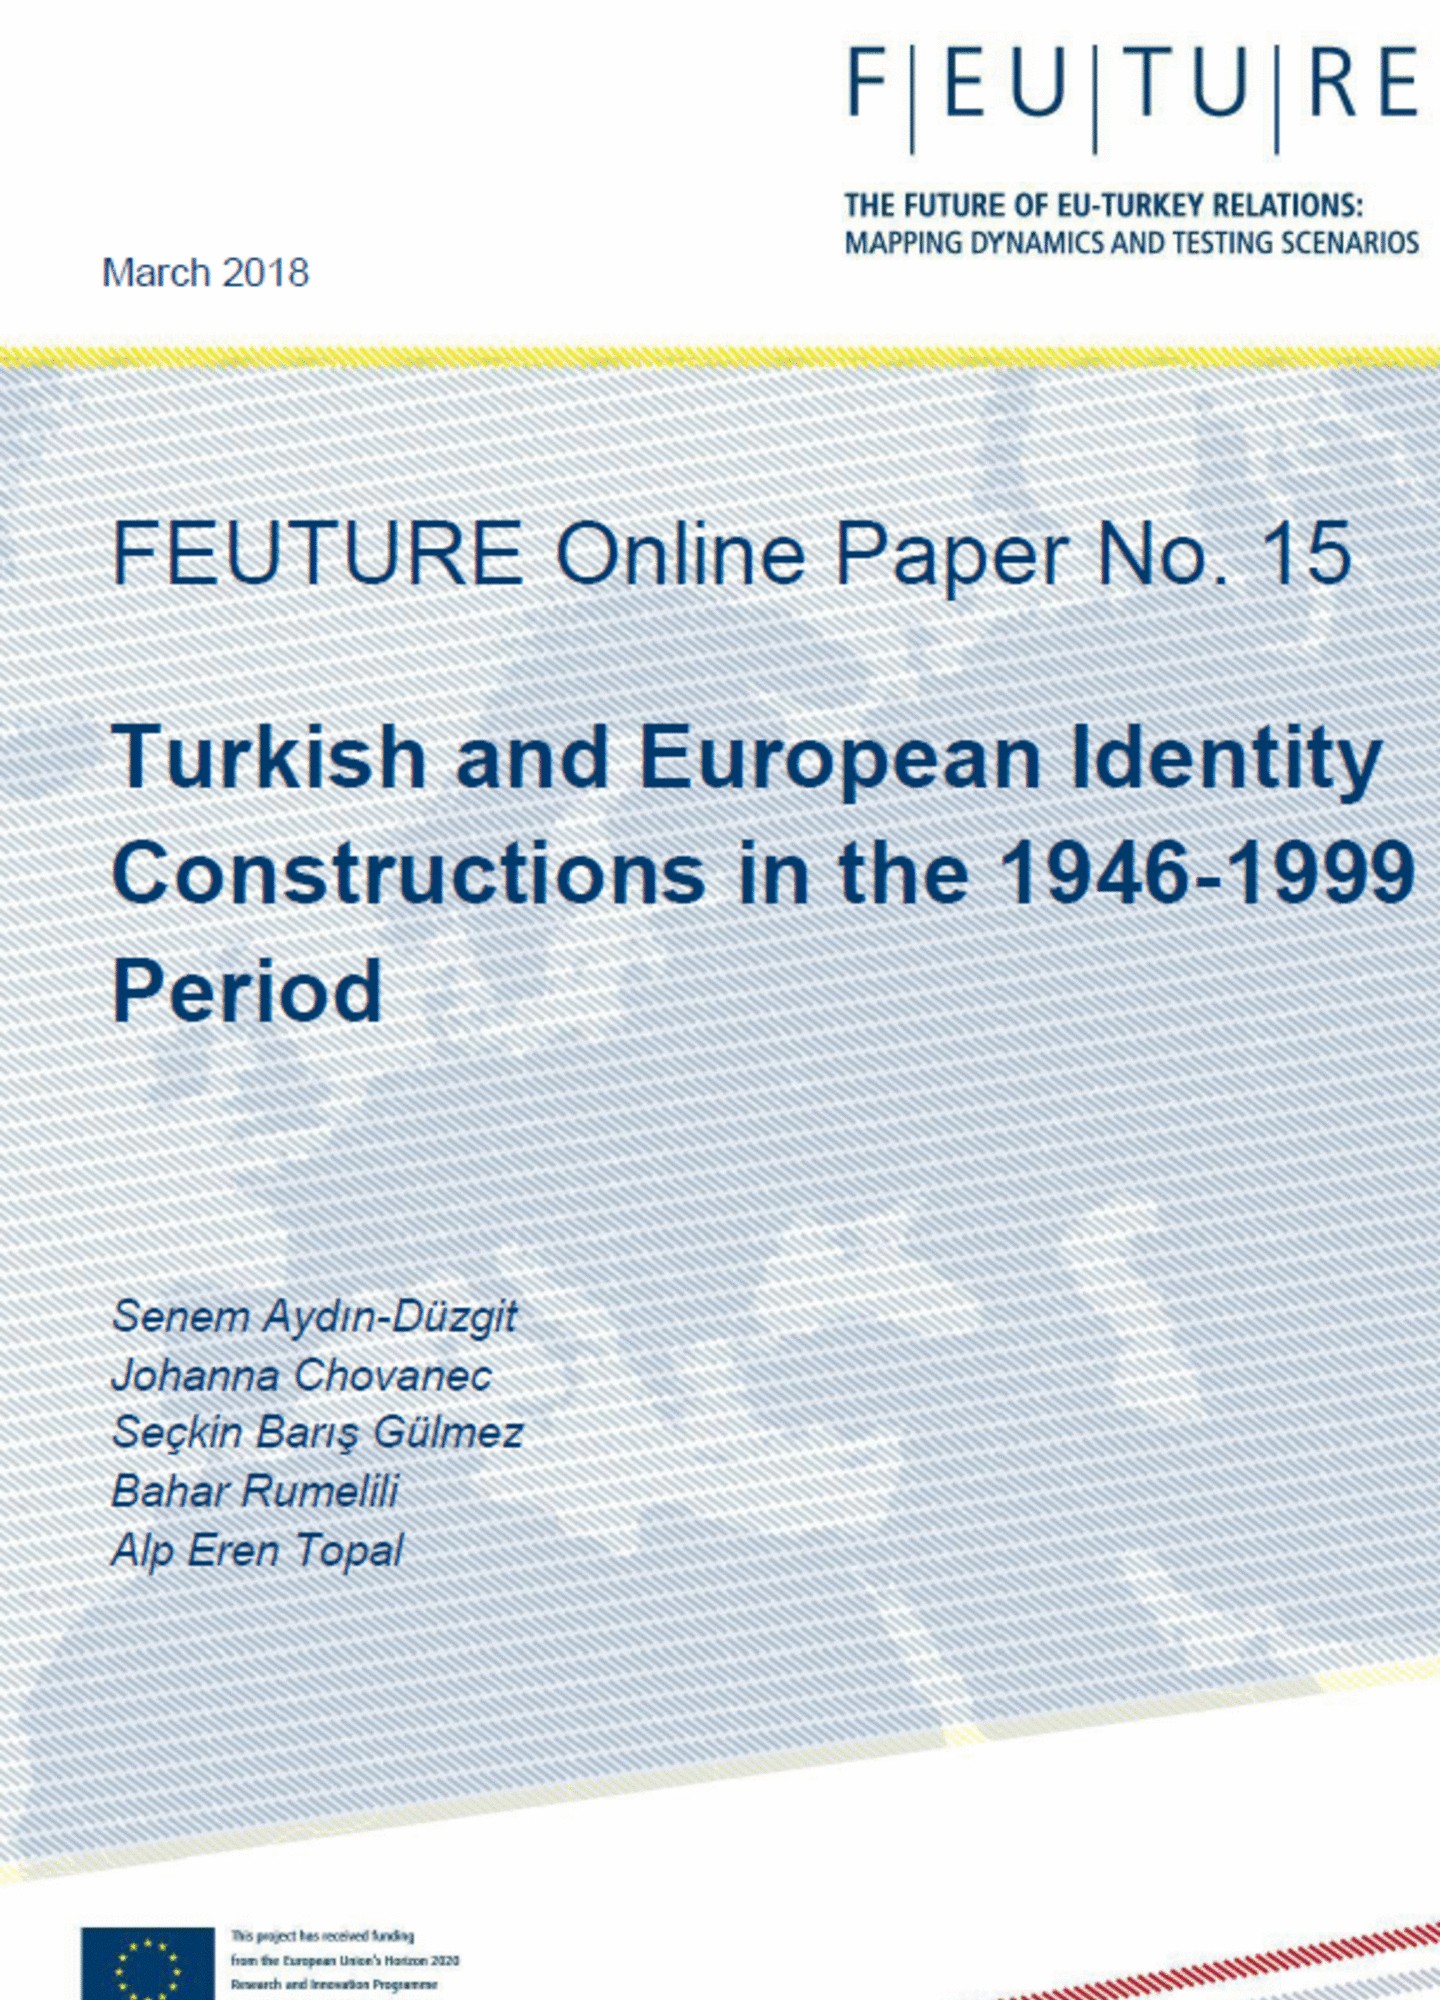 Turkish and European Identity Constructions in the 1946-1999 Period